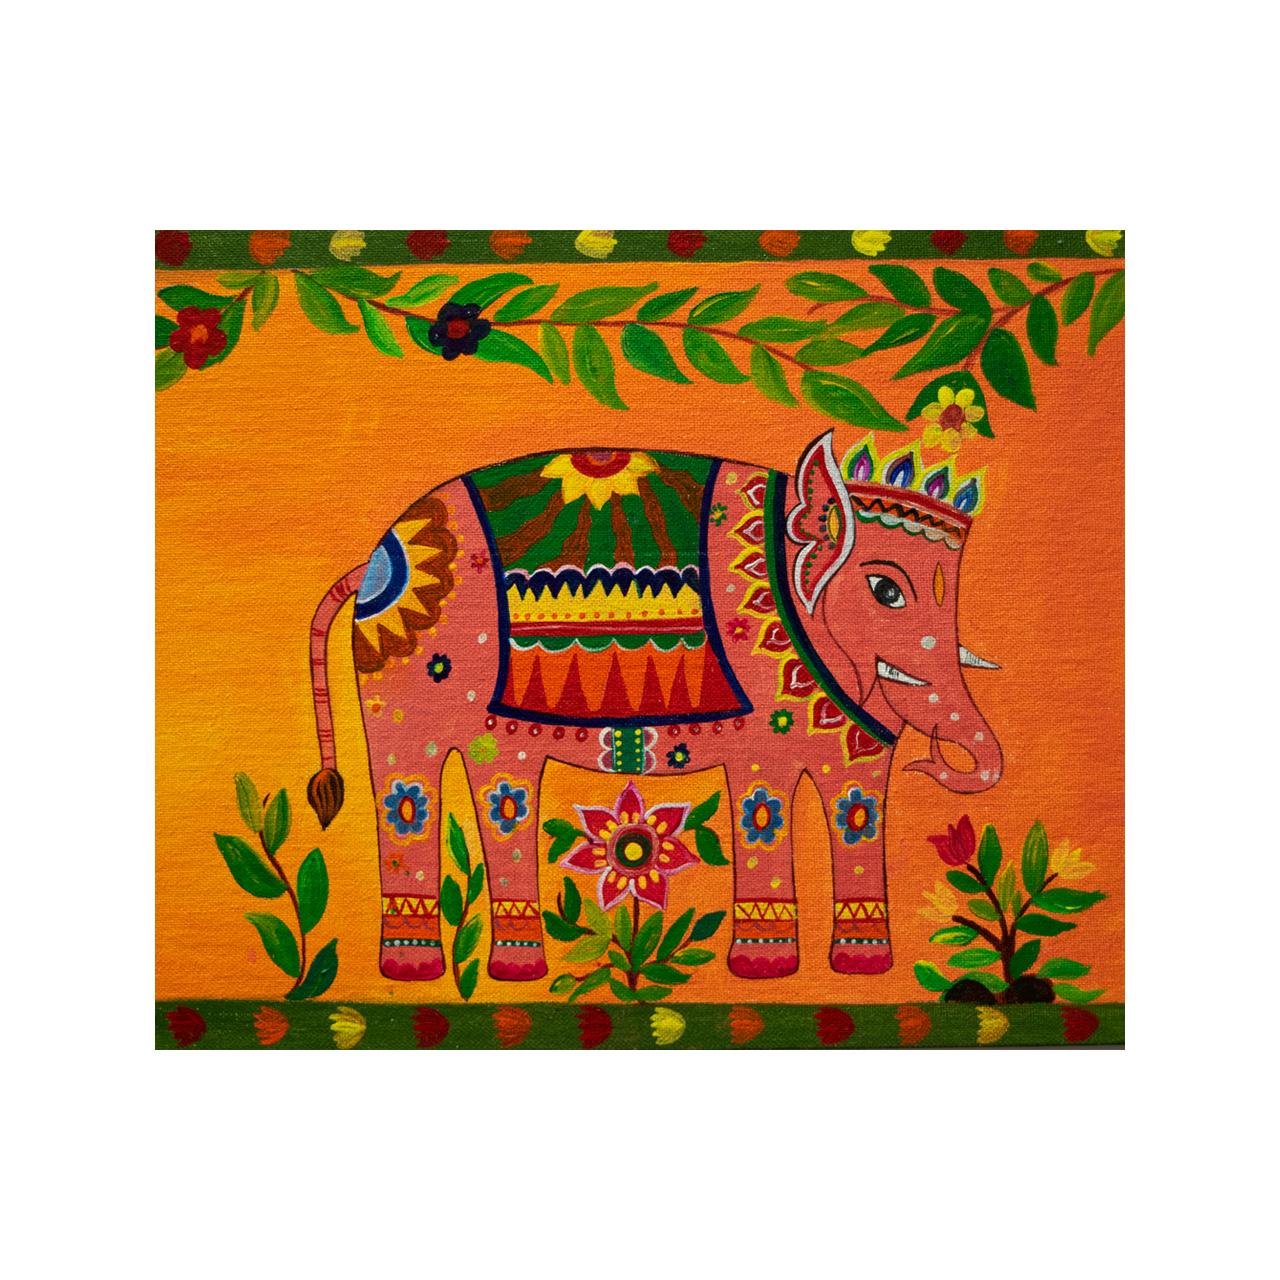 MADHUBANI STYLE 02 (DECORATED ELEPHANTS) (~40% OFF LIST PRICE - LIMITED TIME) - Painting by Jay Patel